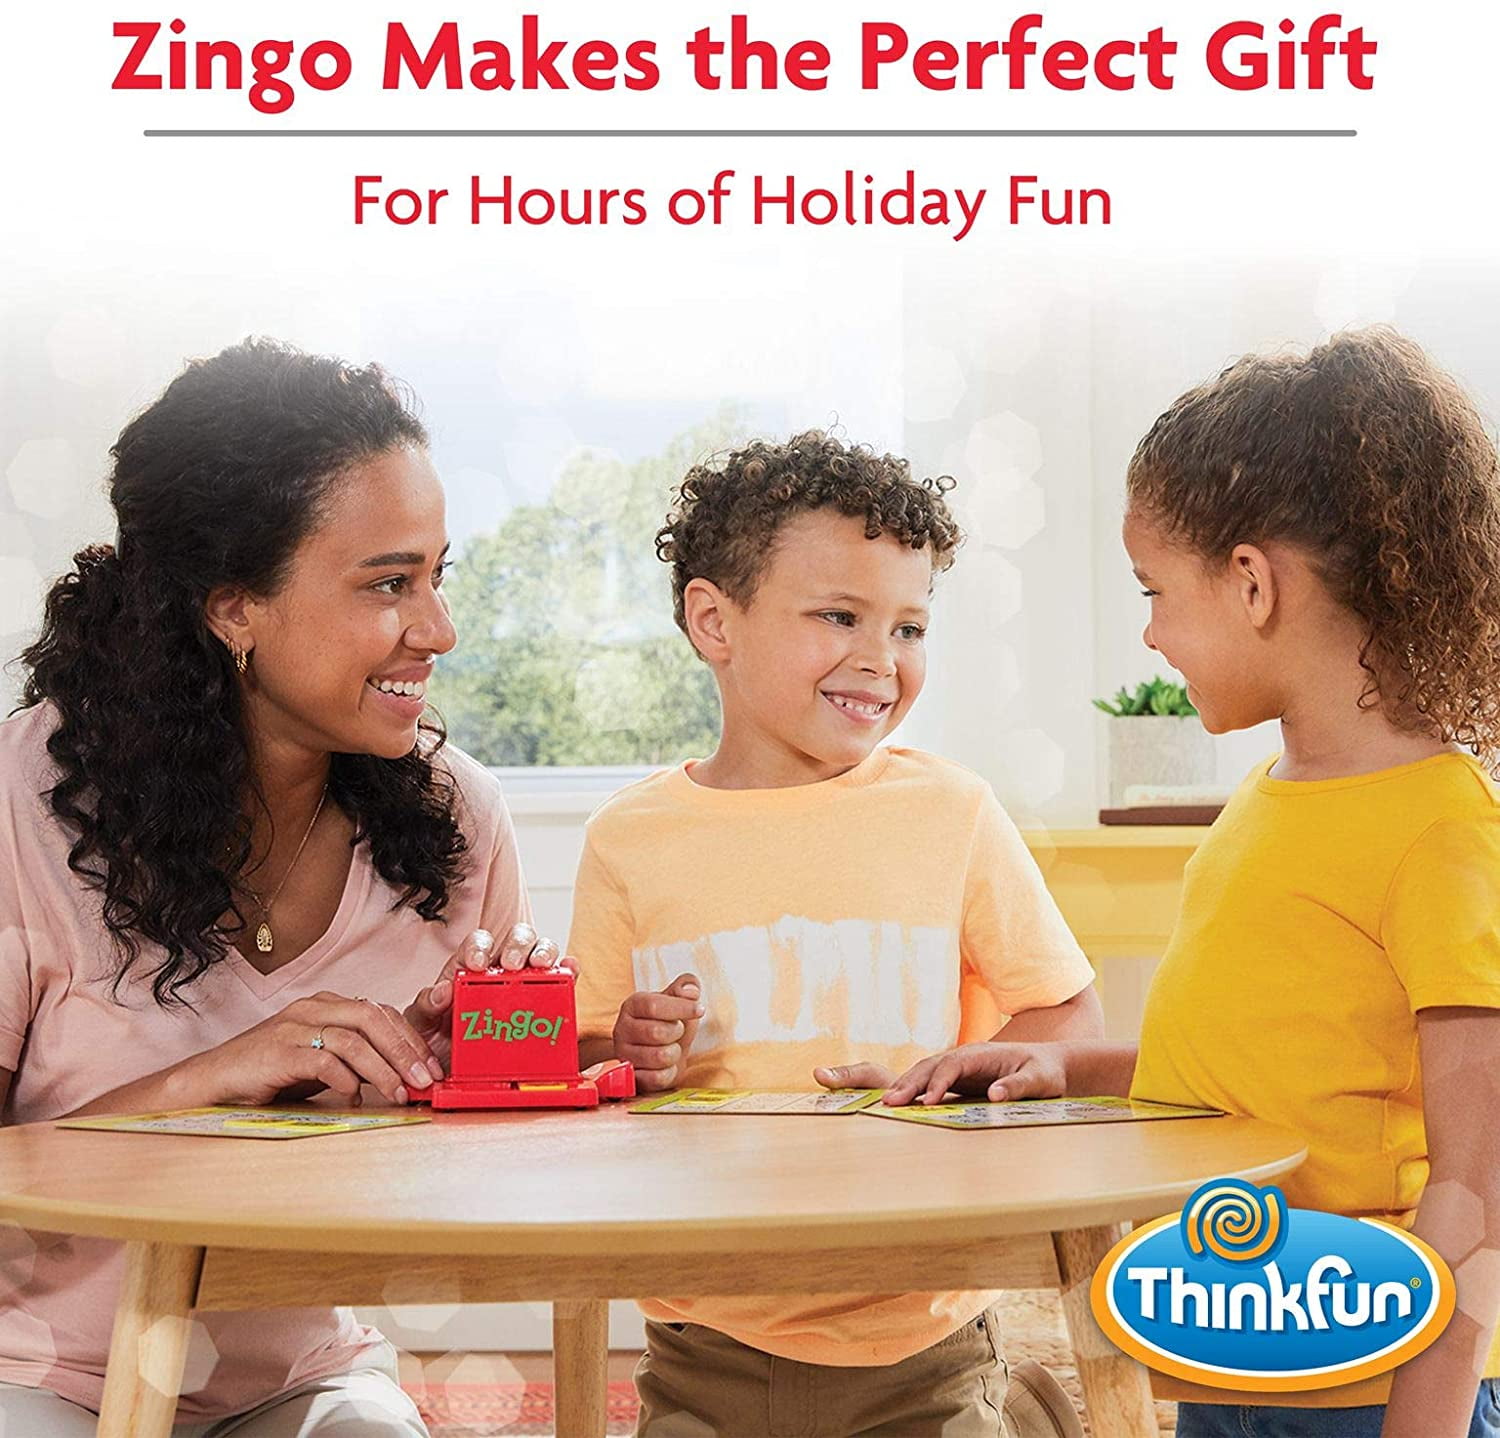  ThinkFun Zingo Sight Words Award Winning Early Reading Game for  Pre-K to 2nd Grade - Toy of the Year Finalist, A Fun and Educational Game  Developed by Educators for Boys and